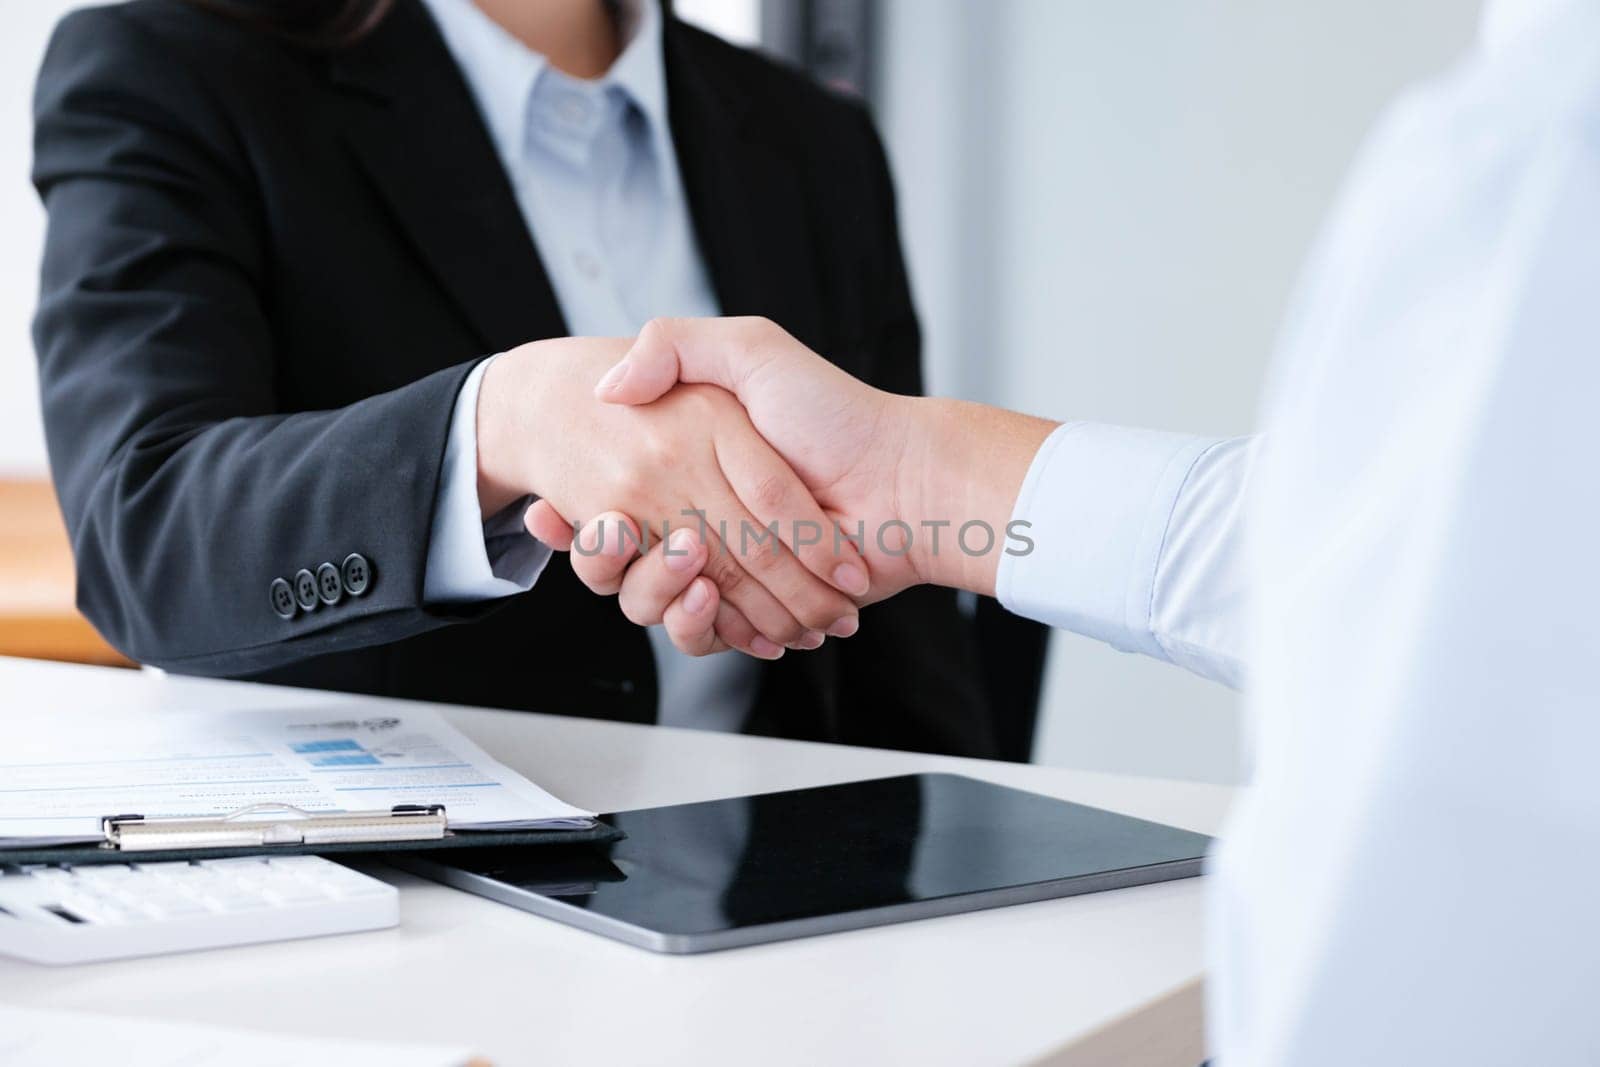 Professional Handshake Over Business Deal by ijeab